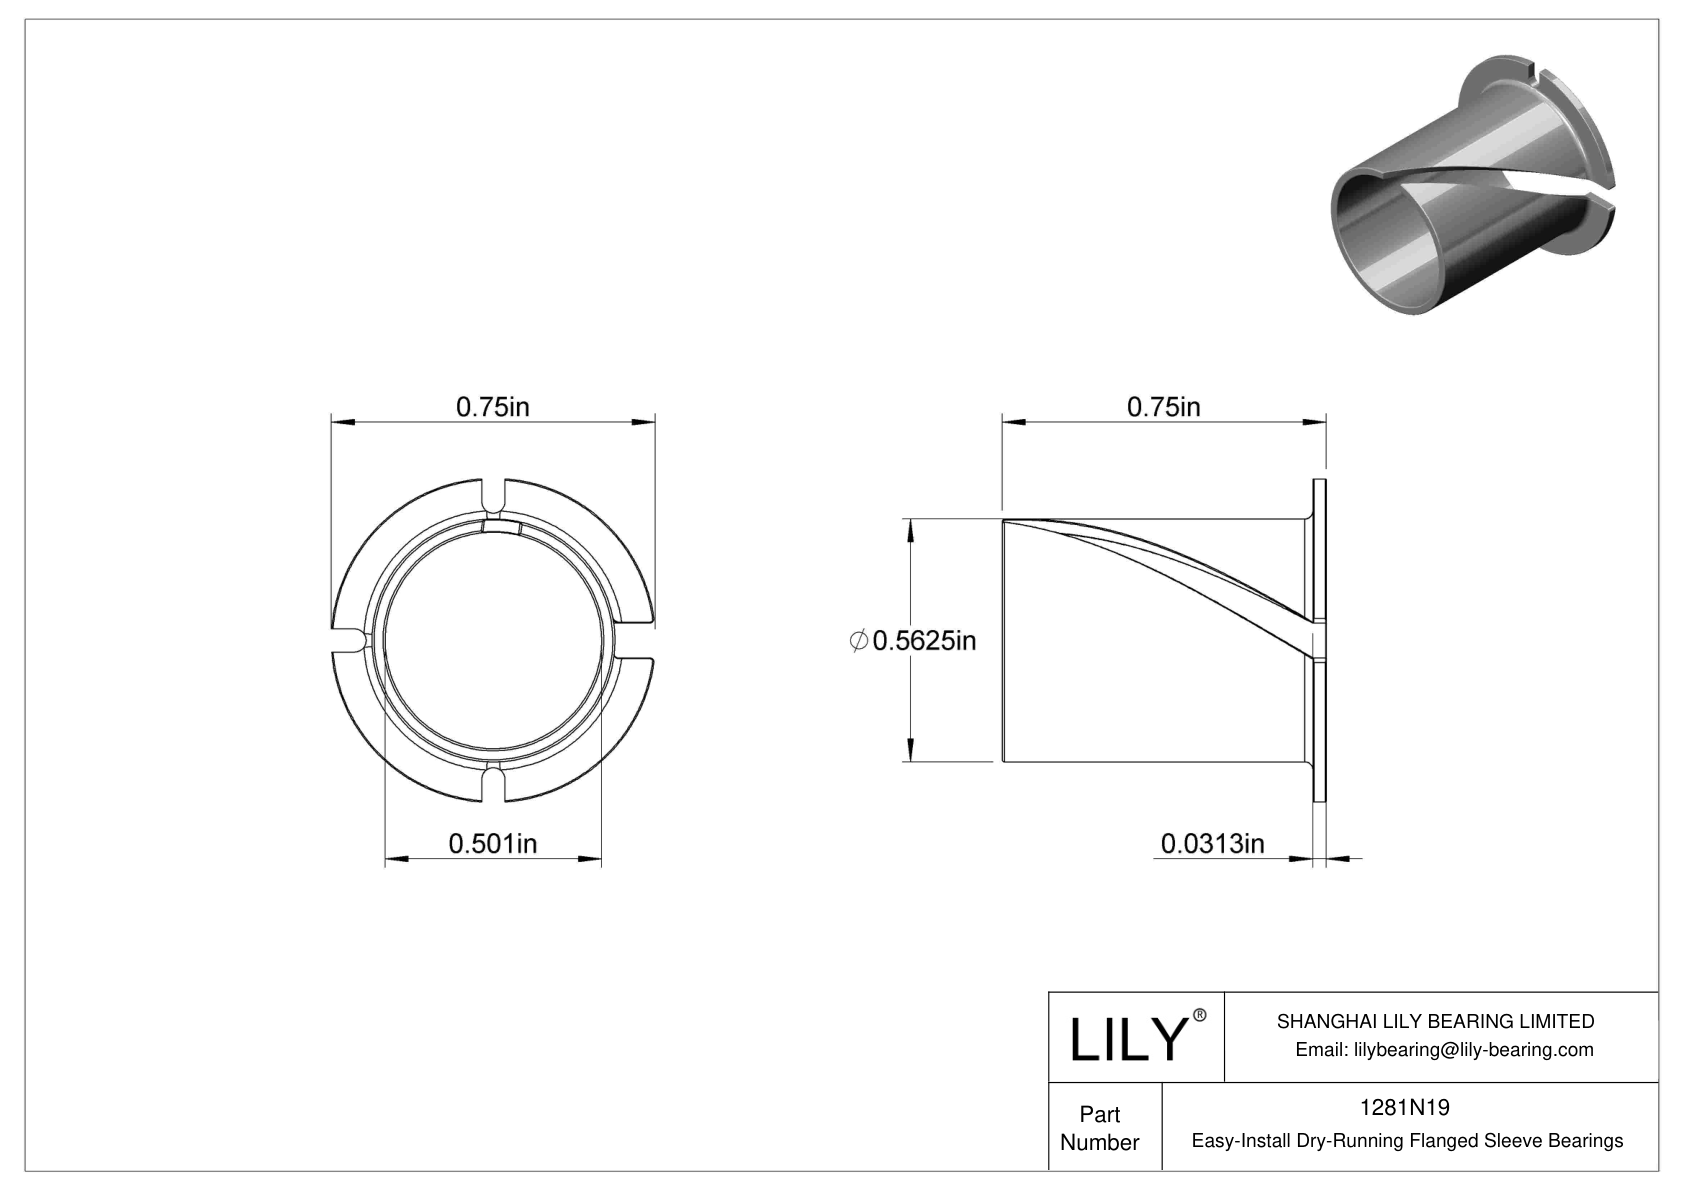 BCIBNBJ Easy-Install Dry-Running Flanged Sleeve Bearings cad drawing